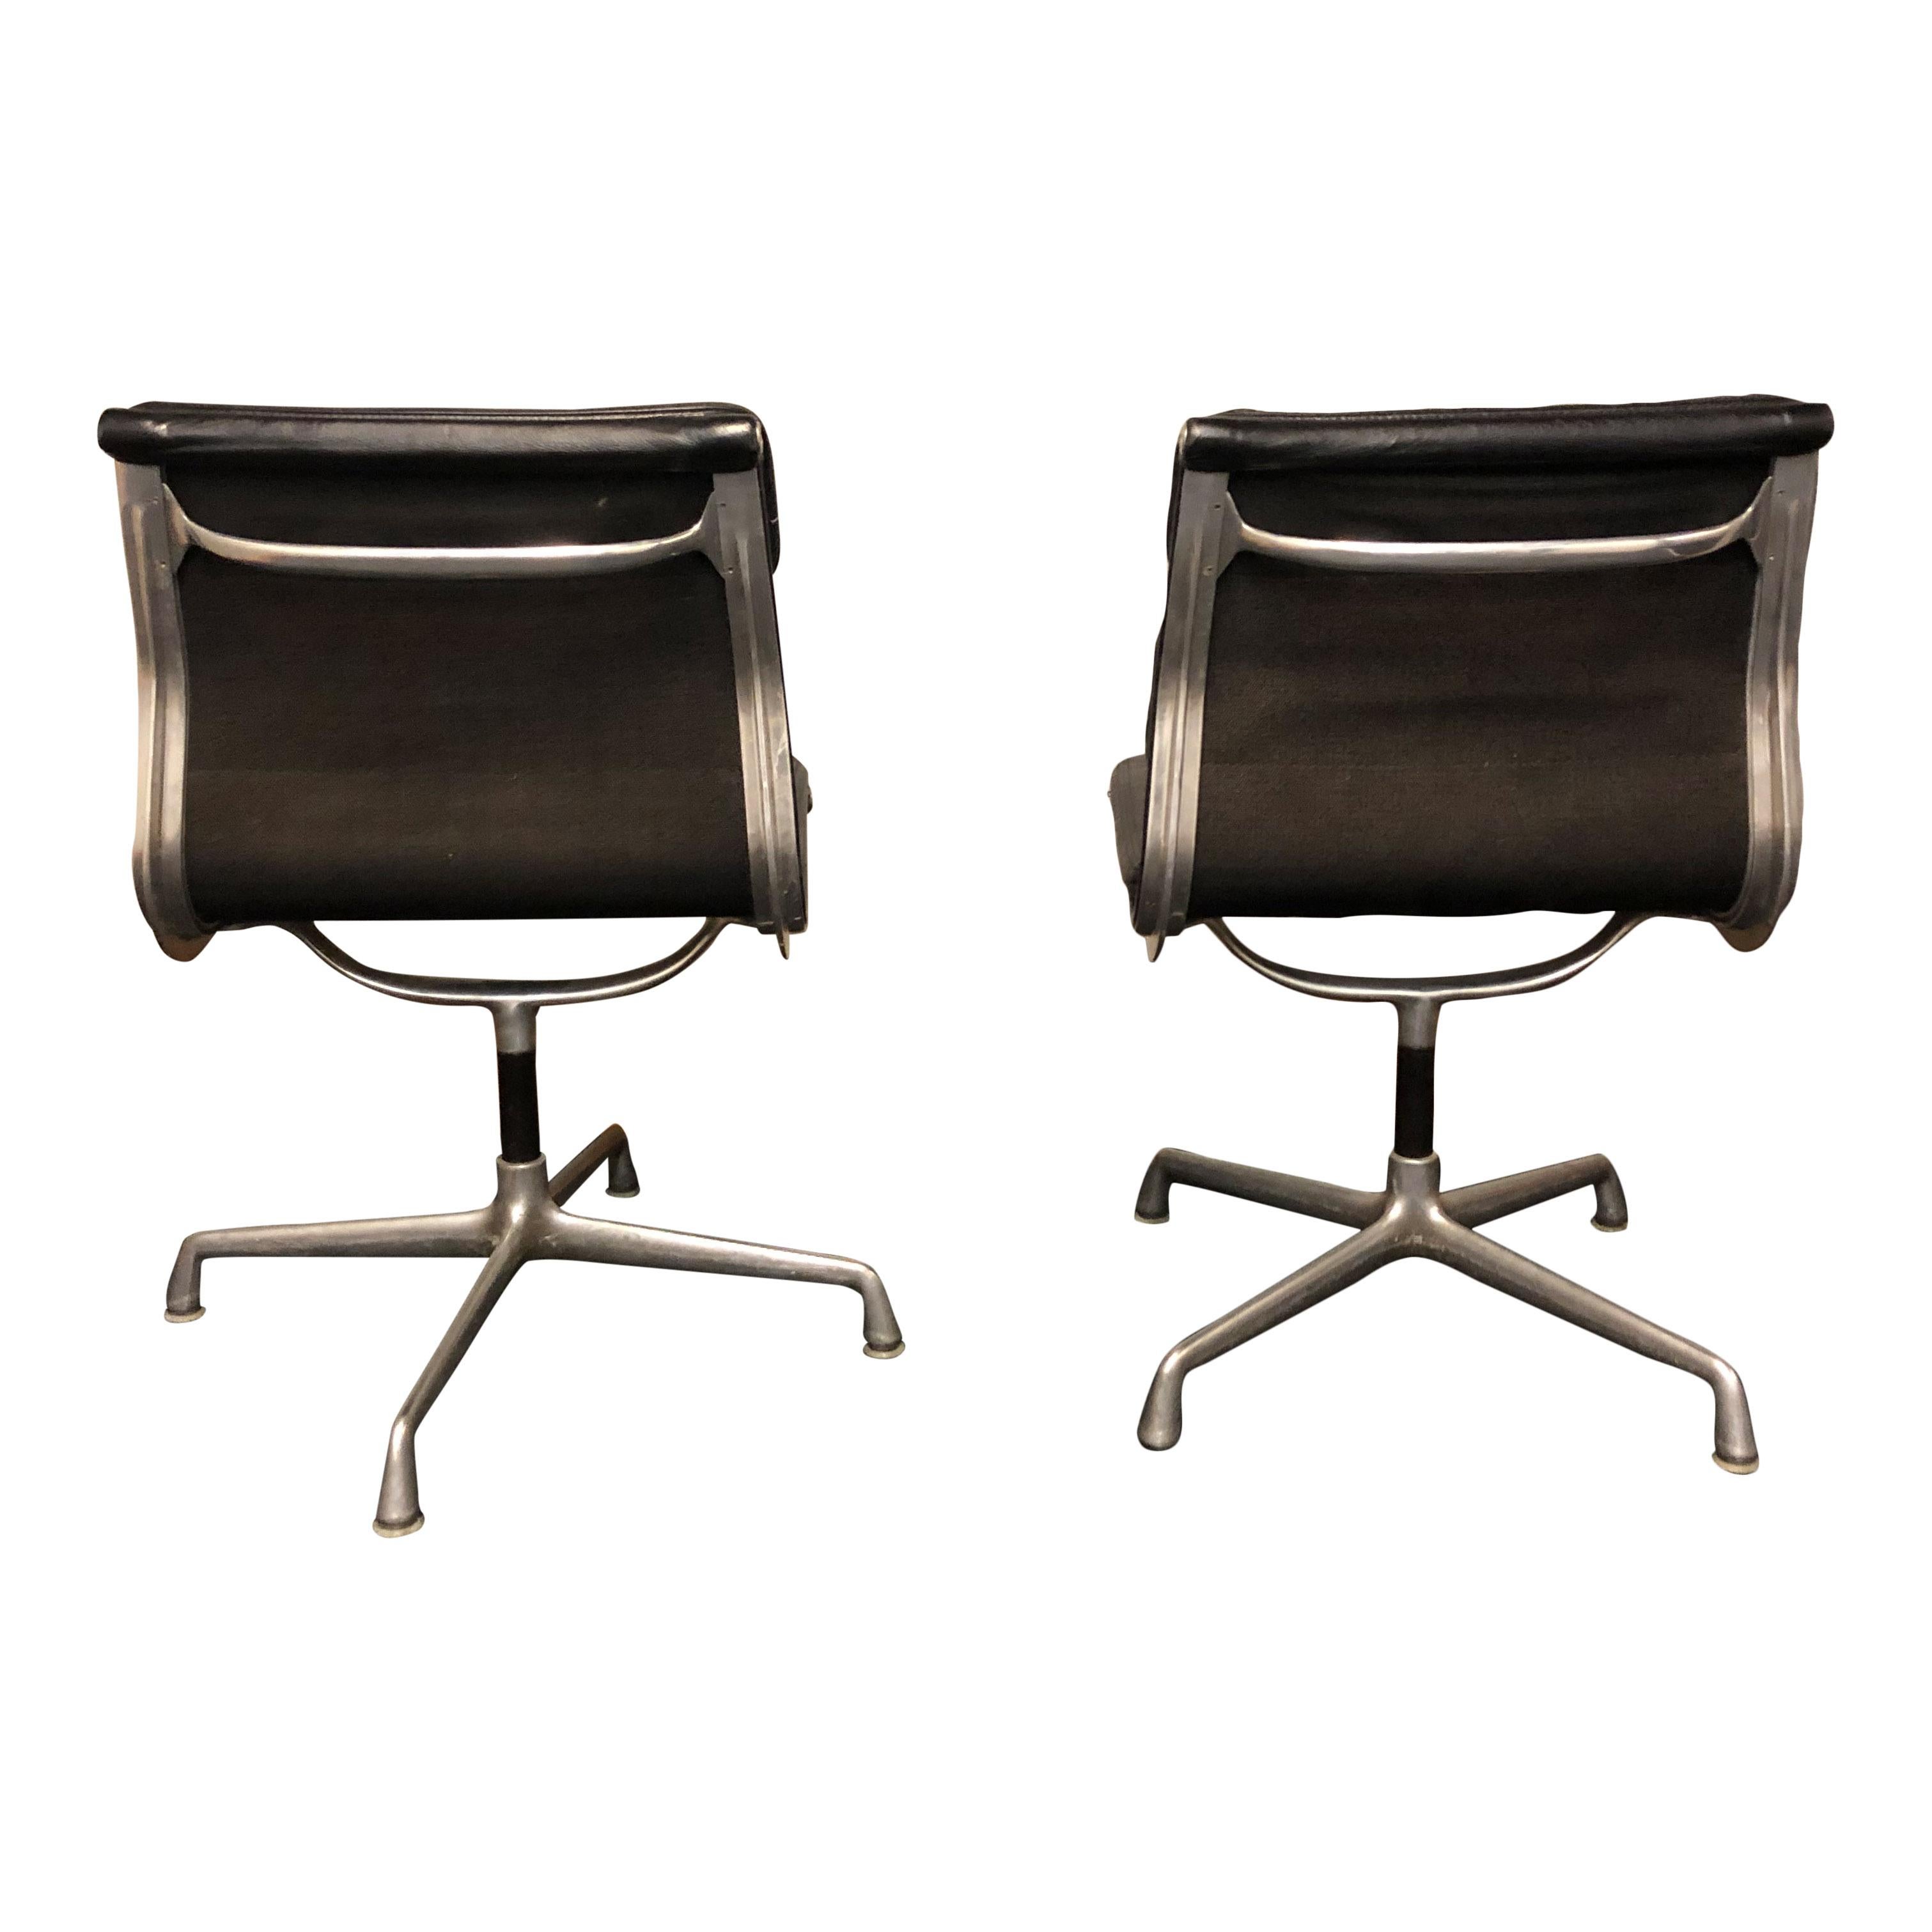 Mid-Century Modern Midcentury Soft Pad Side Chairs by Eames for Herman Miller in Black Leather